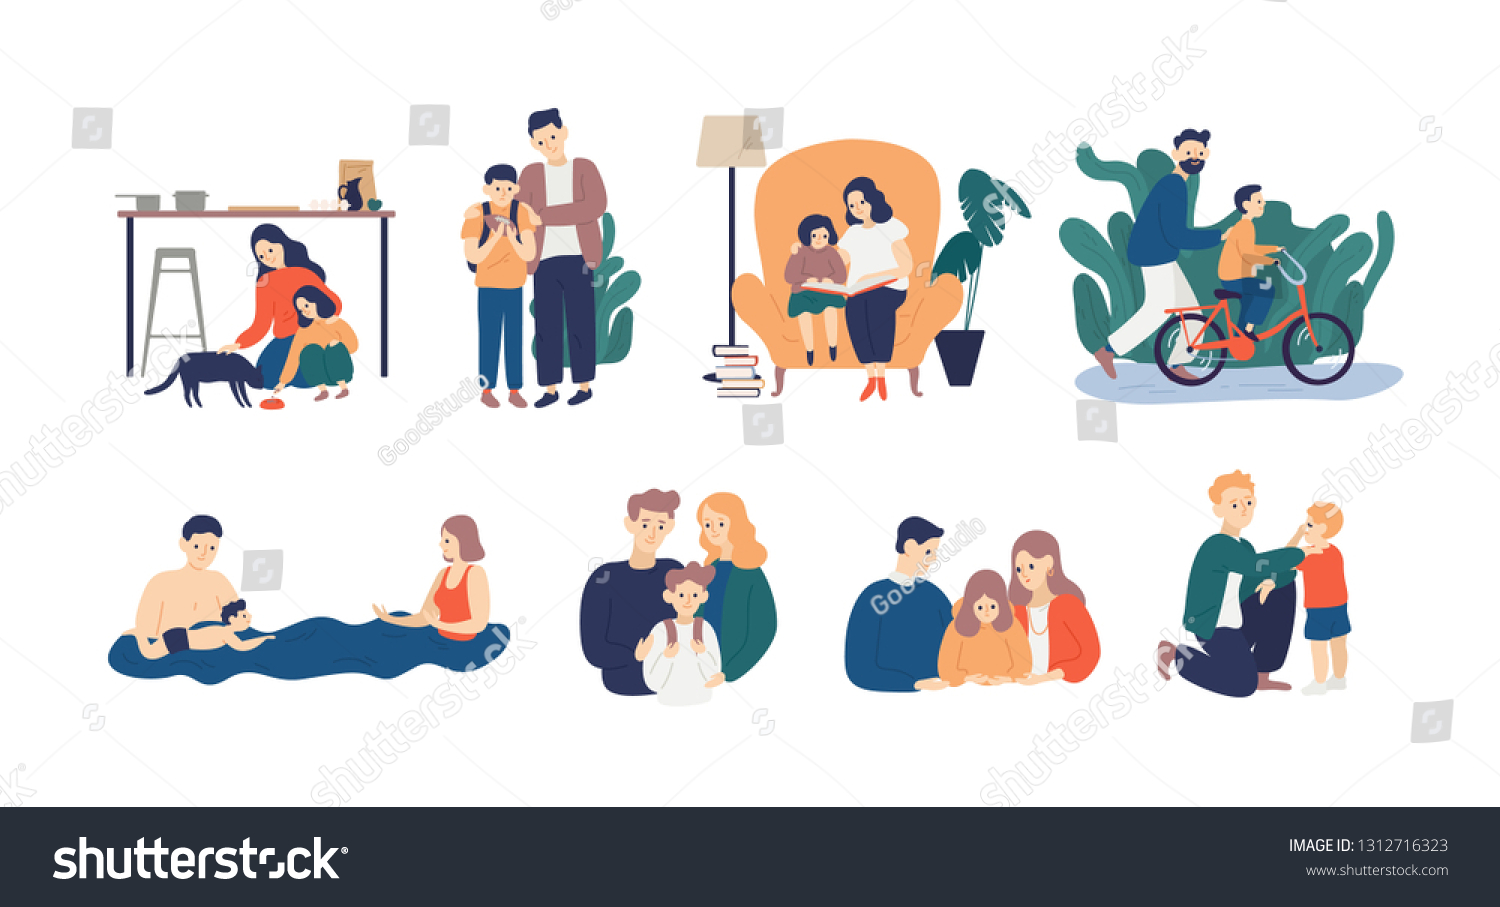 Bundle of happy loving family scenes. Good parenting and nurturing. Care, trust and support between parents and children. Mother and father educating and teaching their kid. Flat vector illustration. #1312716323